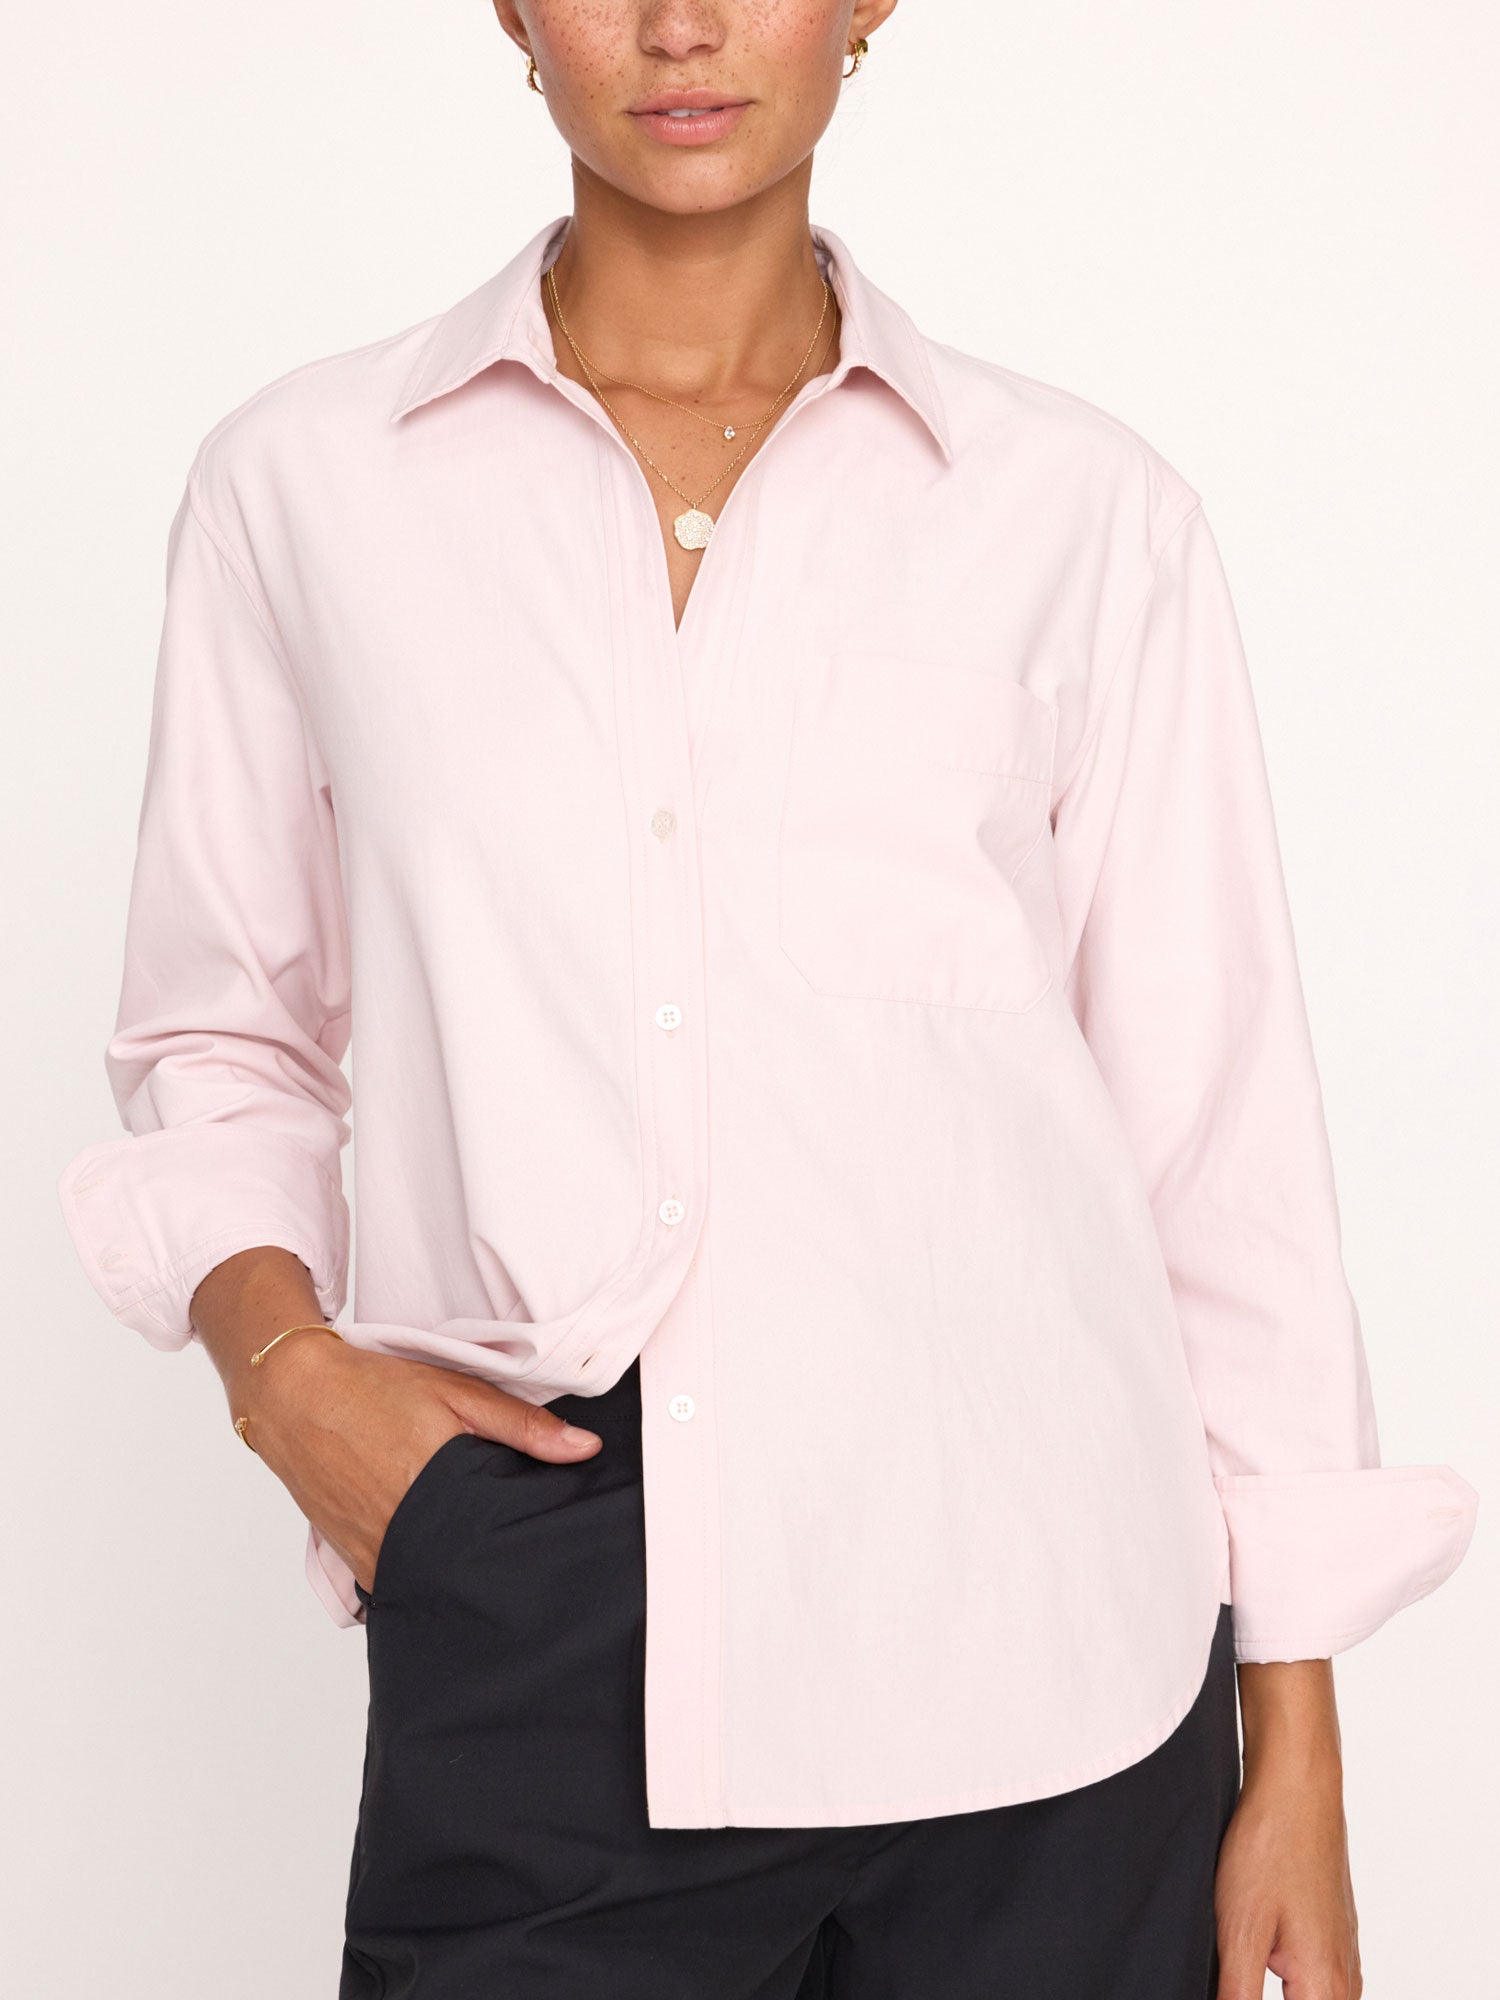 Everyday button up light pink shirt front view 3